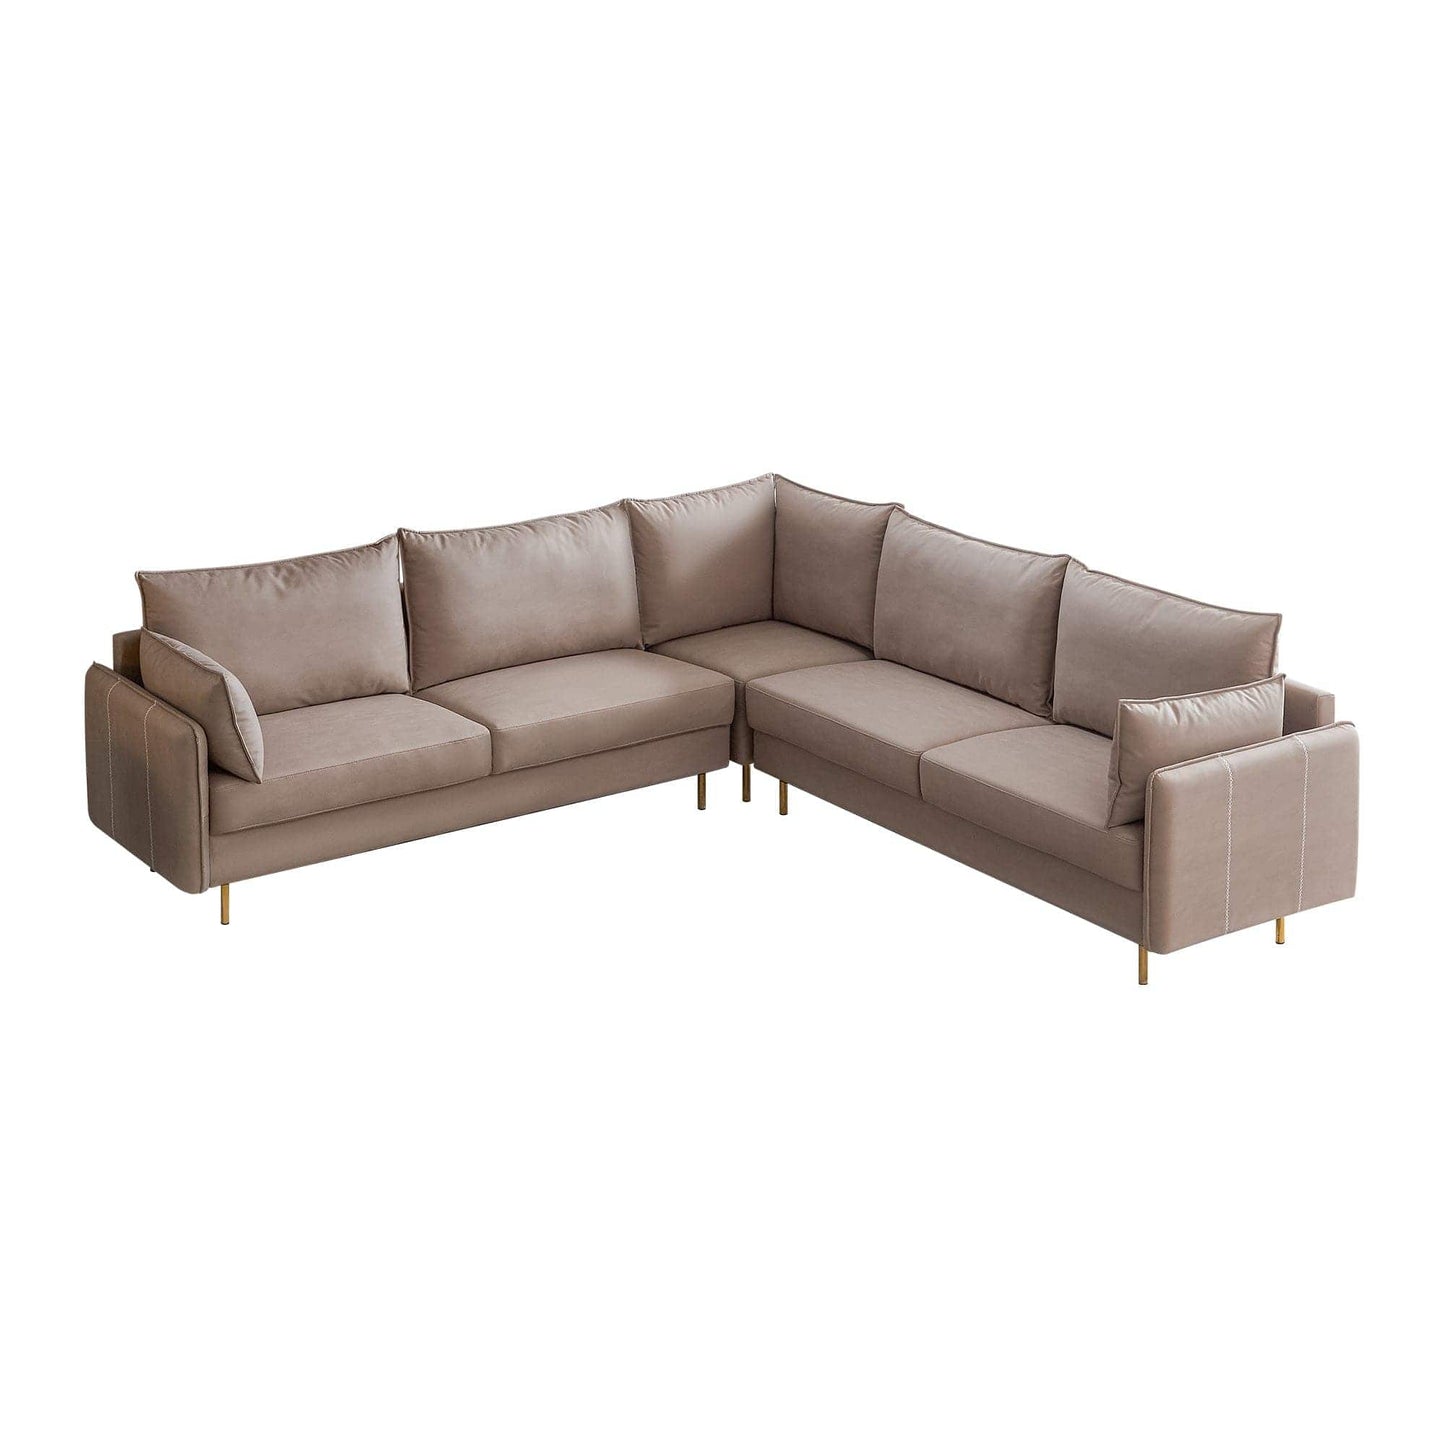 TFC&H Co. L-Shaped Corner Sectional Technical Leather Sofa - Beige- Ships from The US - sectional at TFC&H Co.